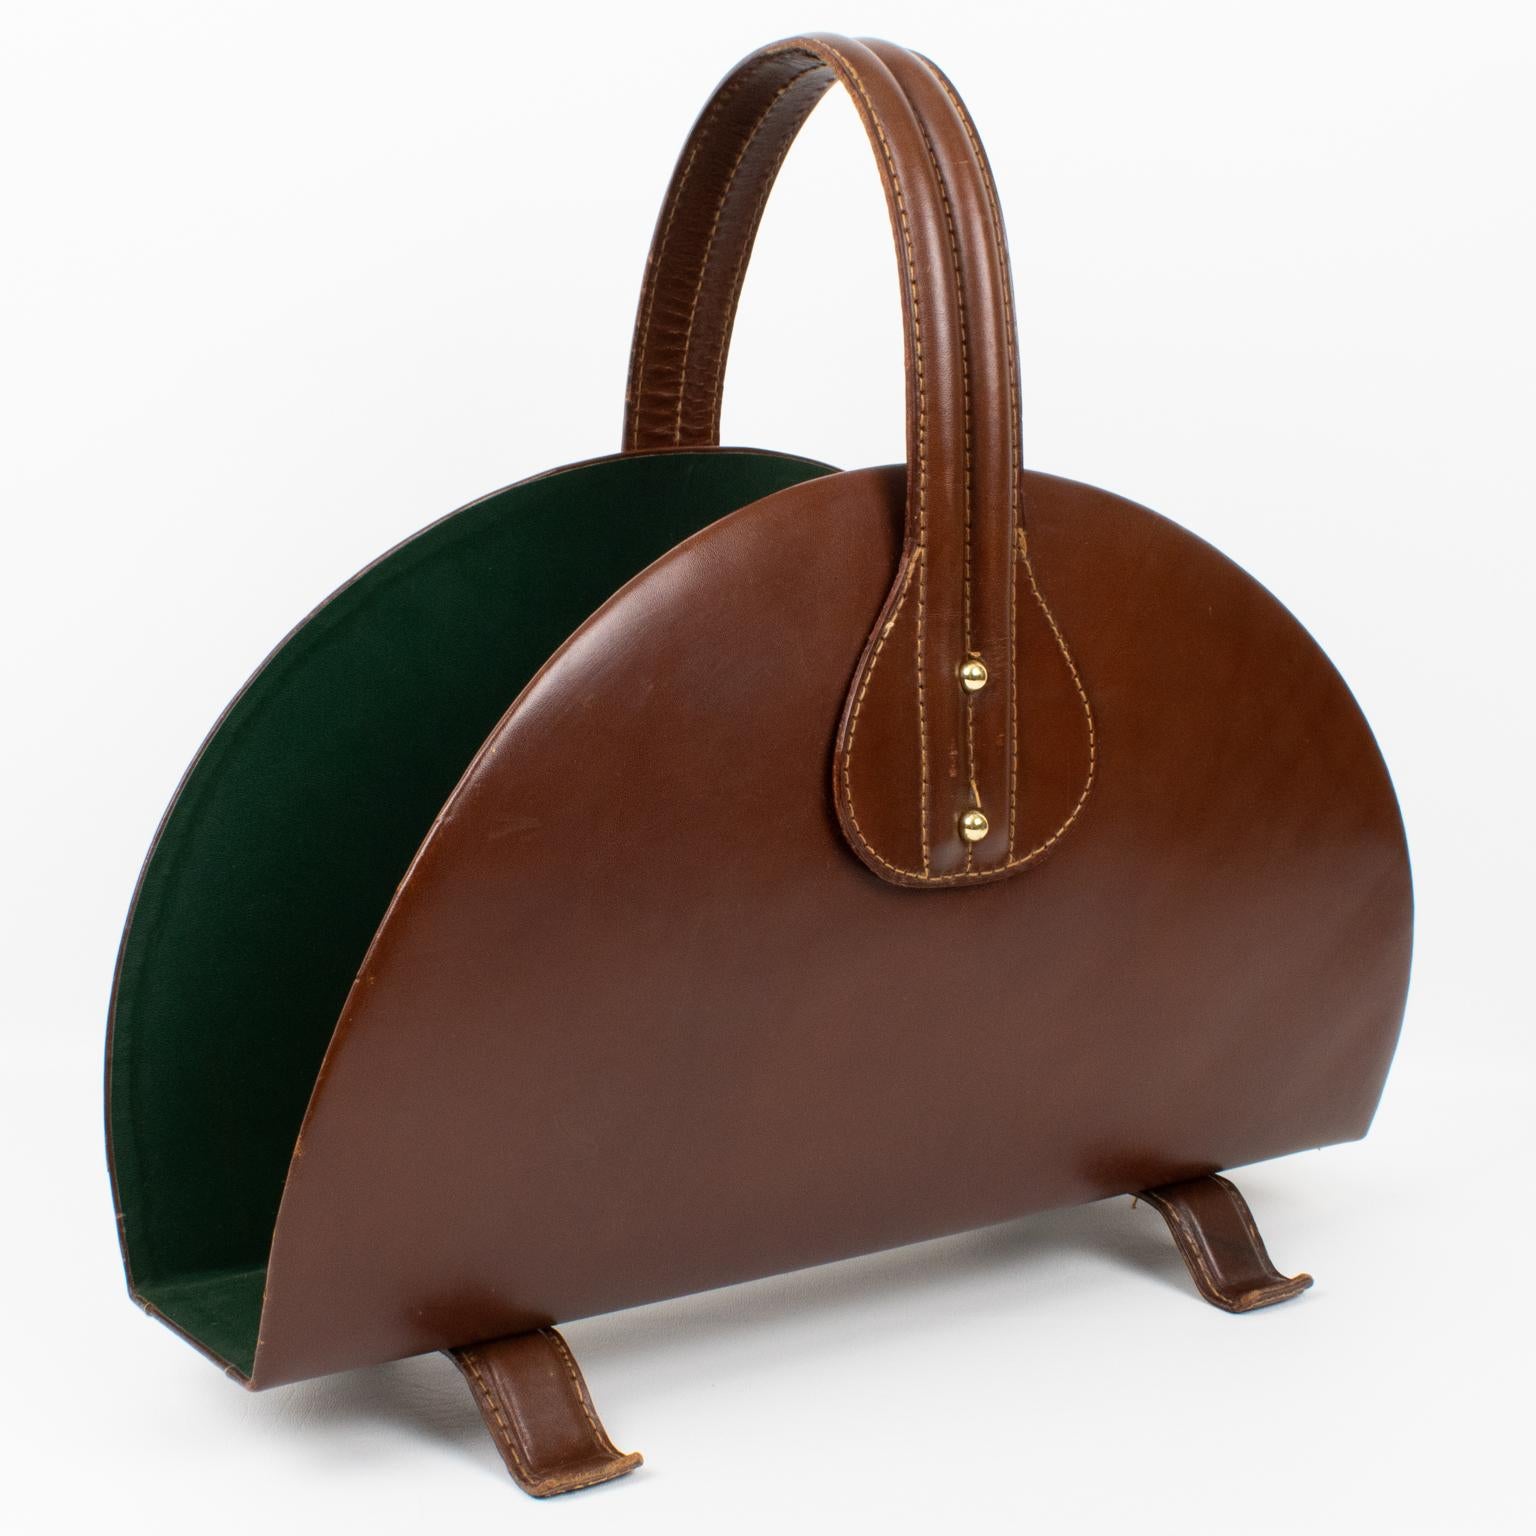 This exquisite magazine rack or holder was expertly designed by renowned French designer Jacques Adnet (1901 to 1984) in the 1950s. The item boasts a strikingly sleek and refined appearance, with its hand-stitched leather material in a warm and deep